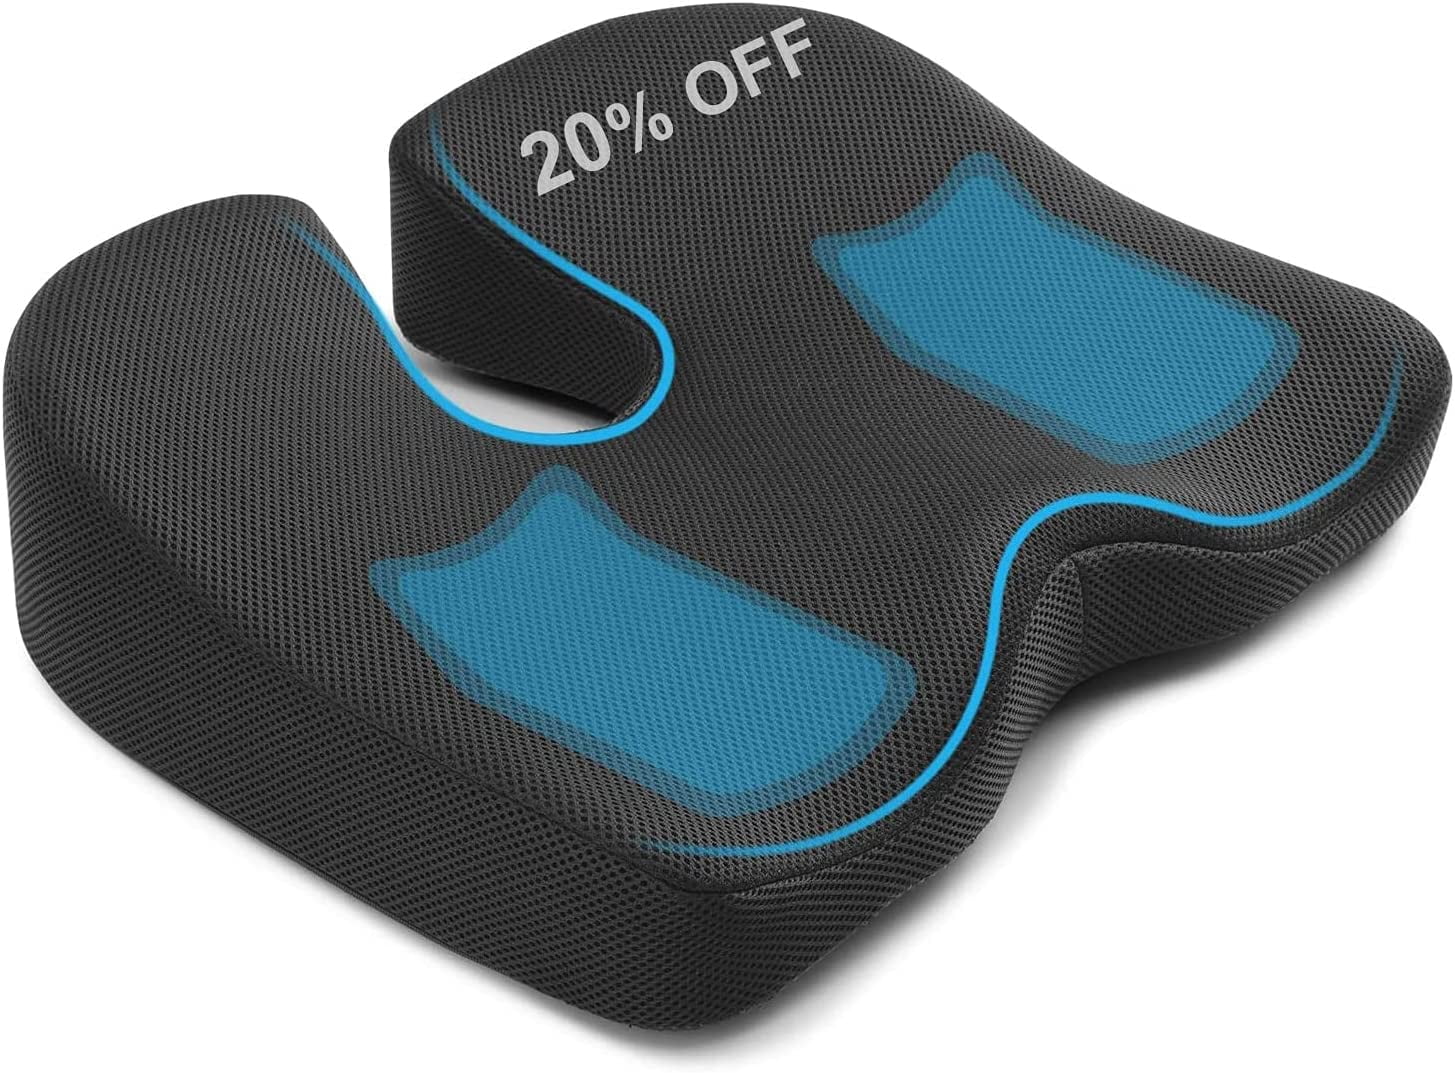 kingphenix Premium Car Seat Cushion, Memory Foam Driver Seat Cushion to  Improve Driving View- Coccyx & Lower Back Pain Relief - Seat Cushion for  Car